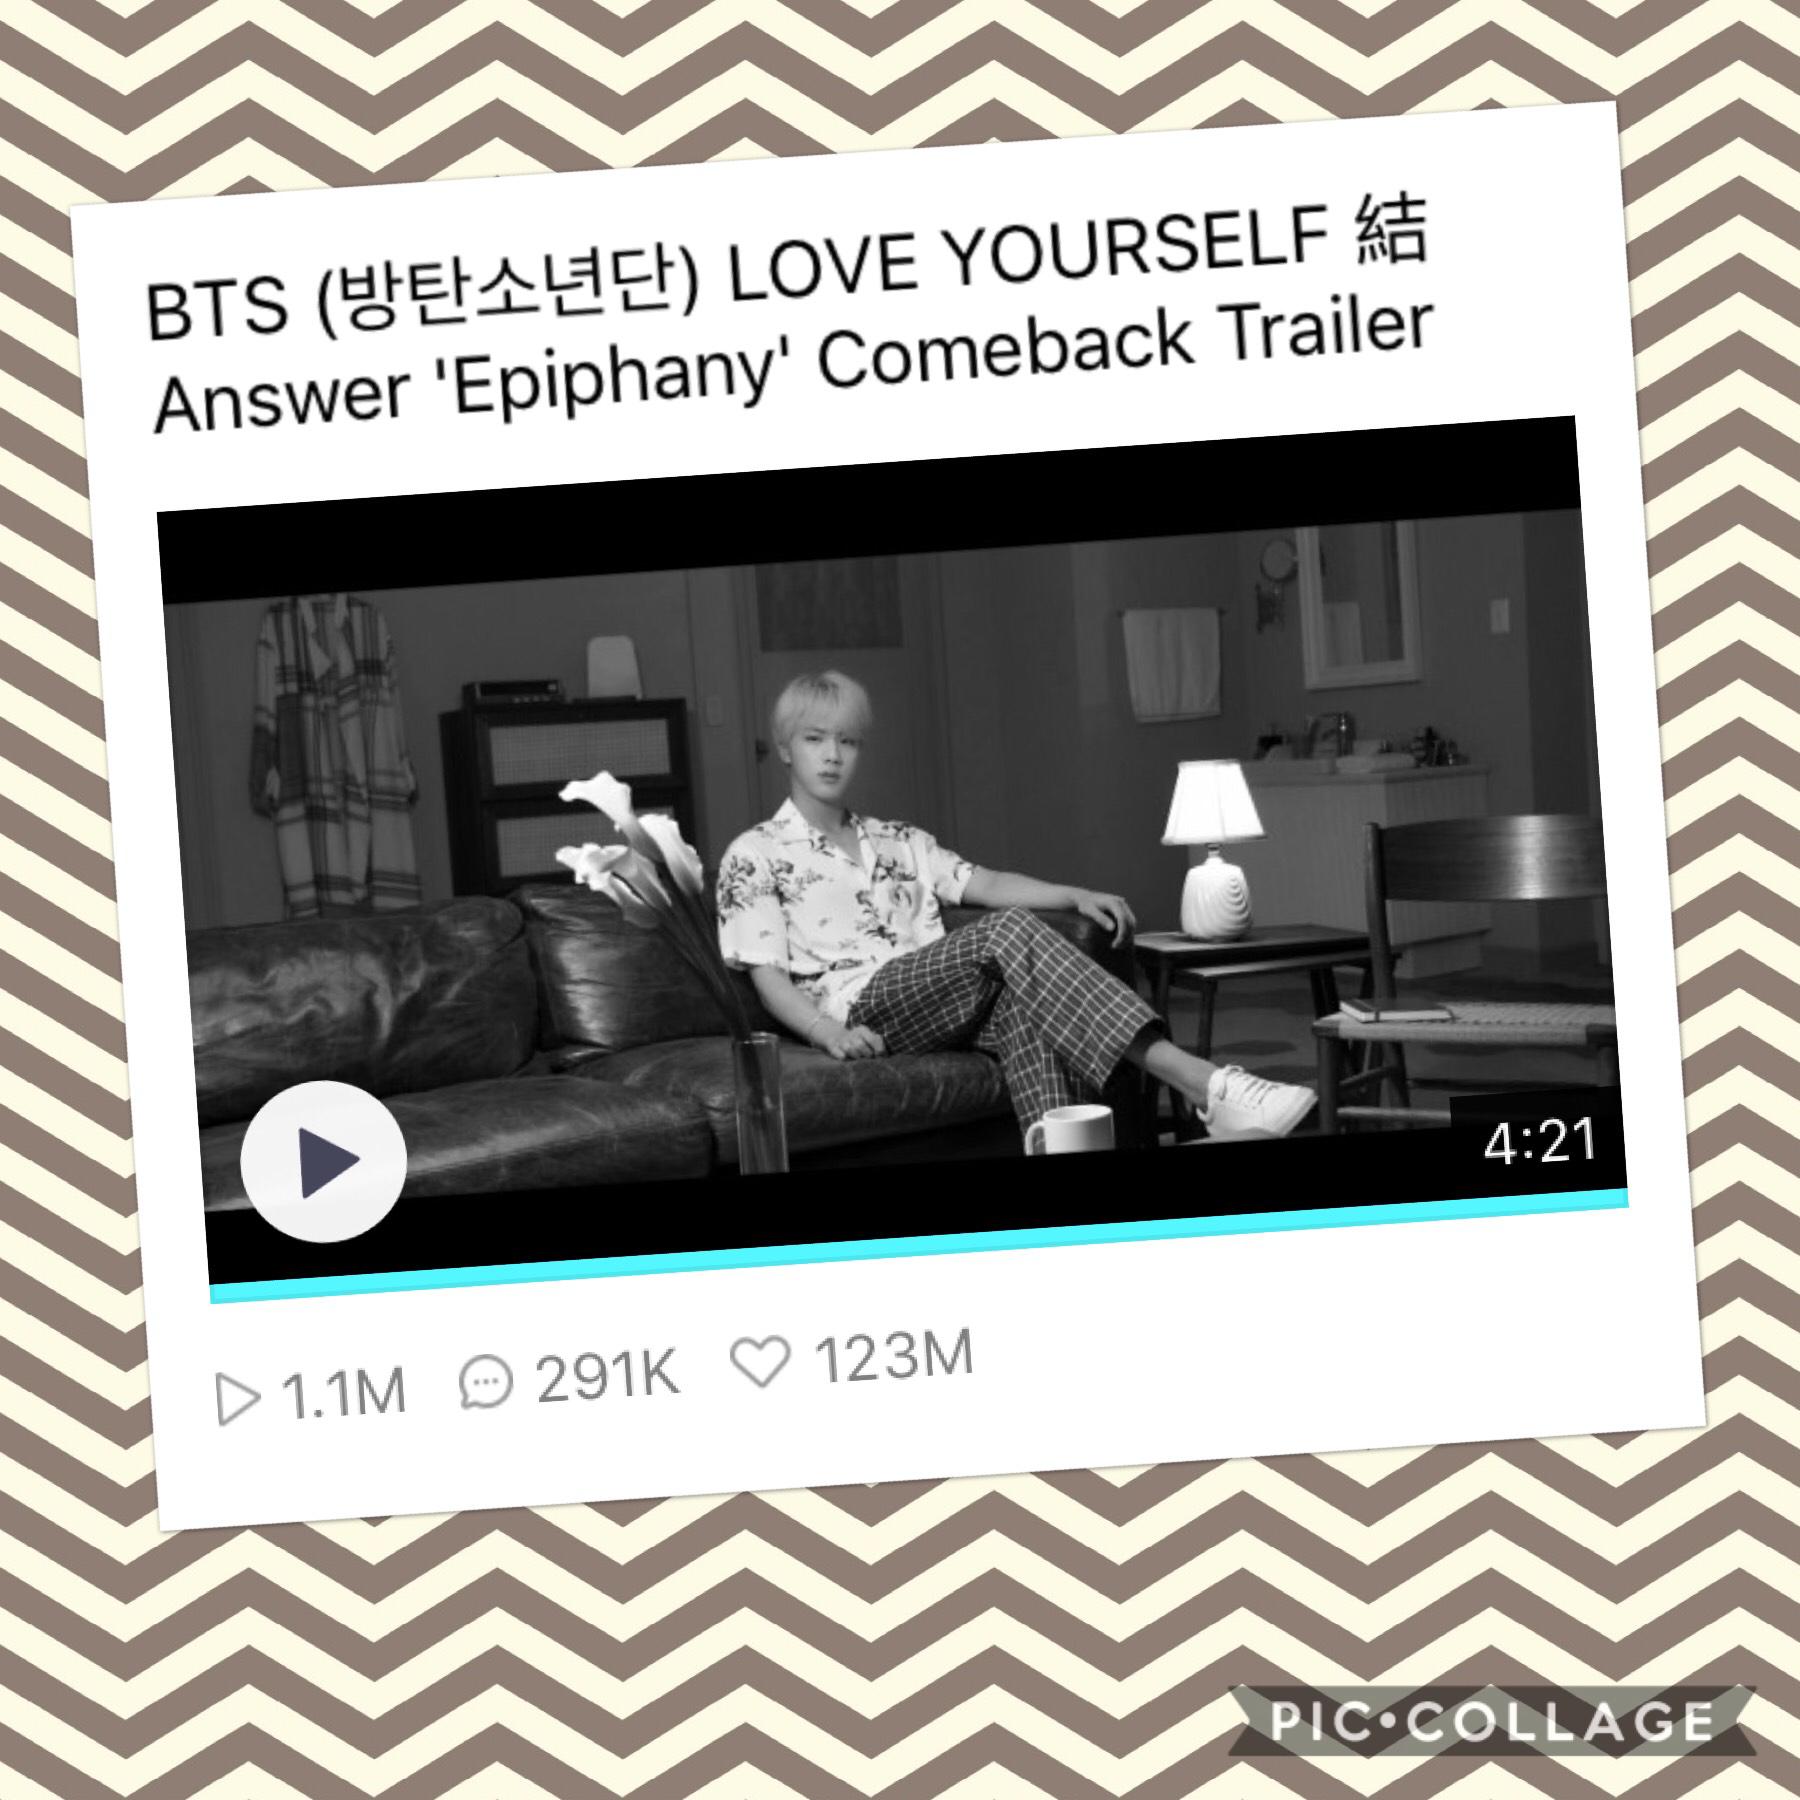 in VLIVE GO FOLLOW THEM (comeback trailer) new song (Epiphany)💕💕LOVE YOURSELF ❤️